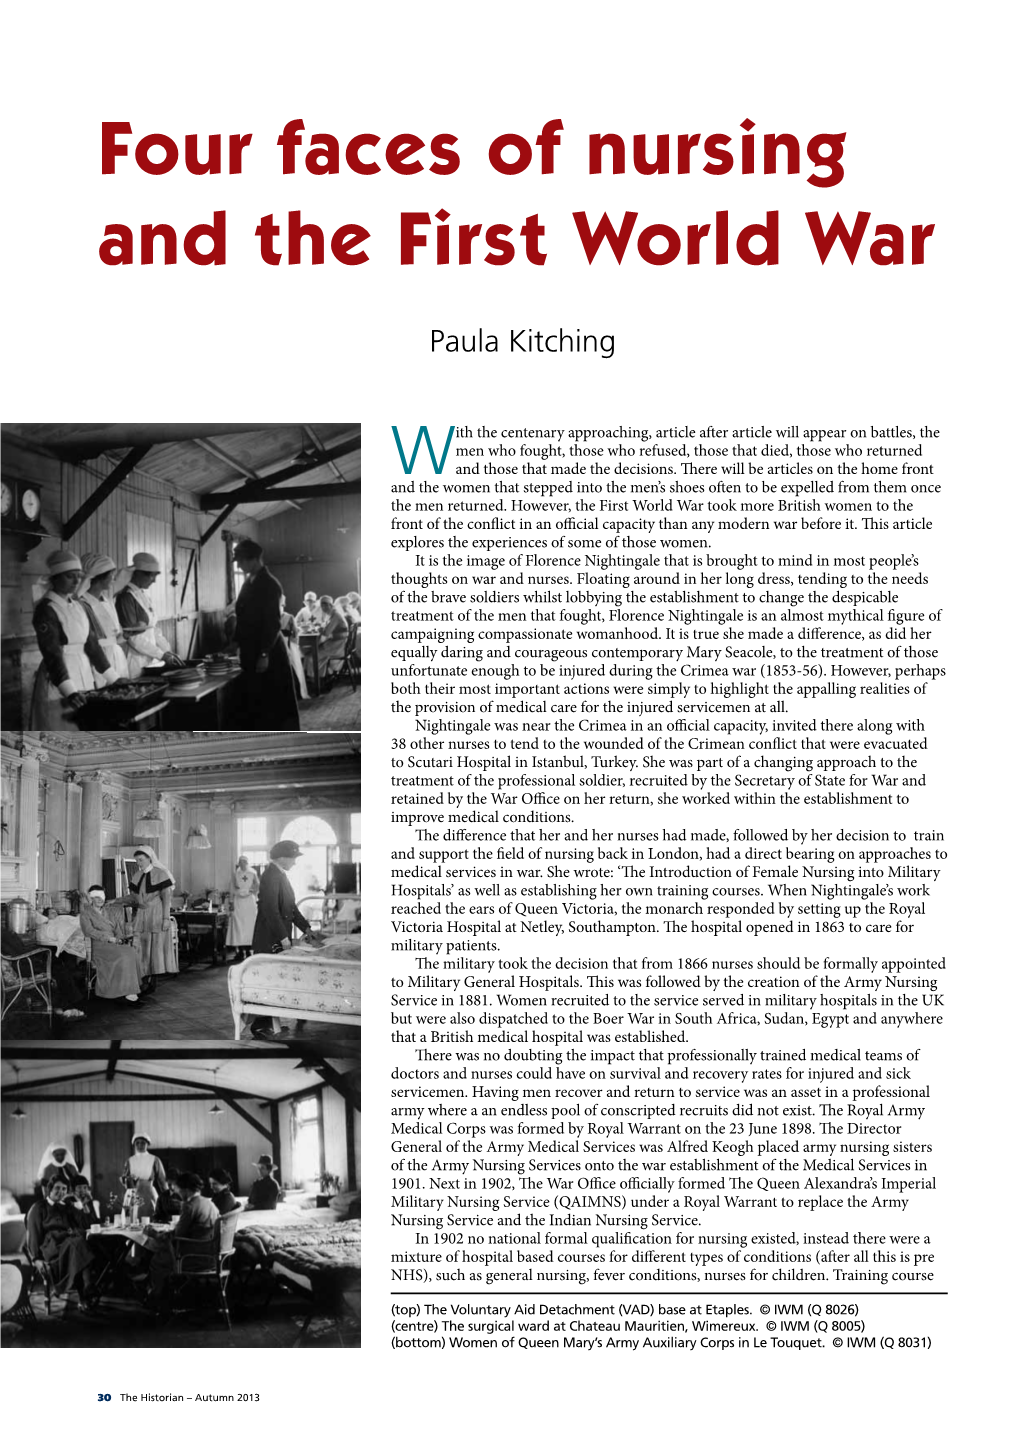 Four Faces of Nursing and the First World War